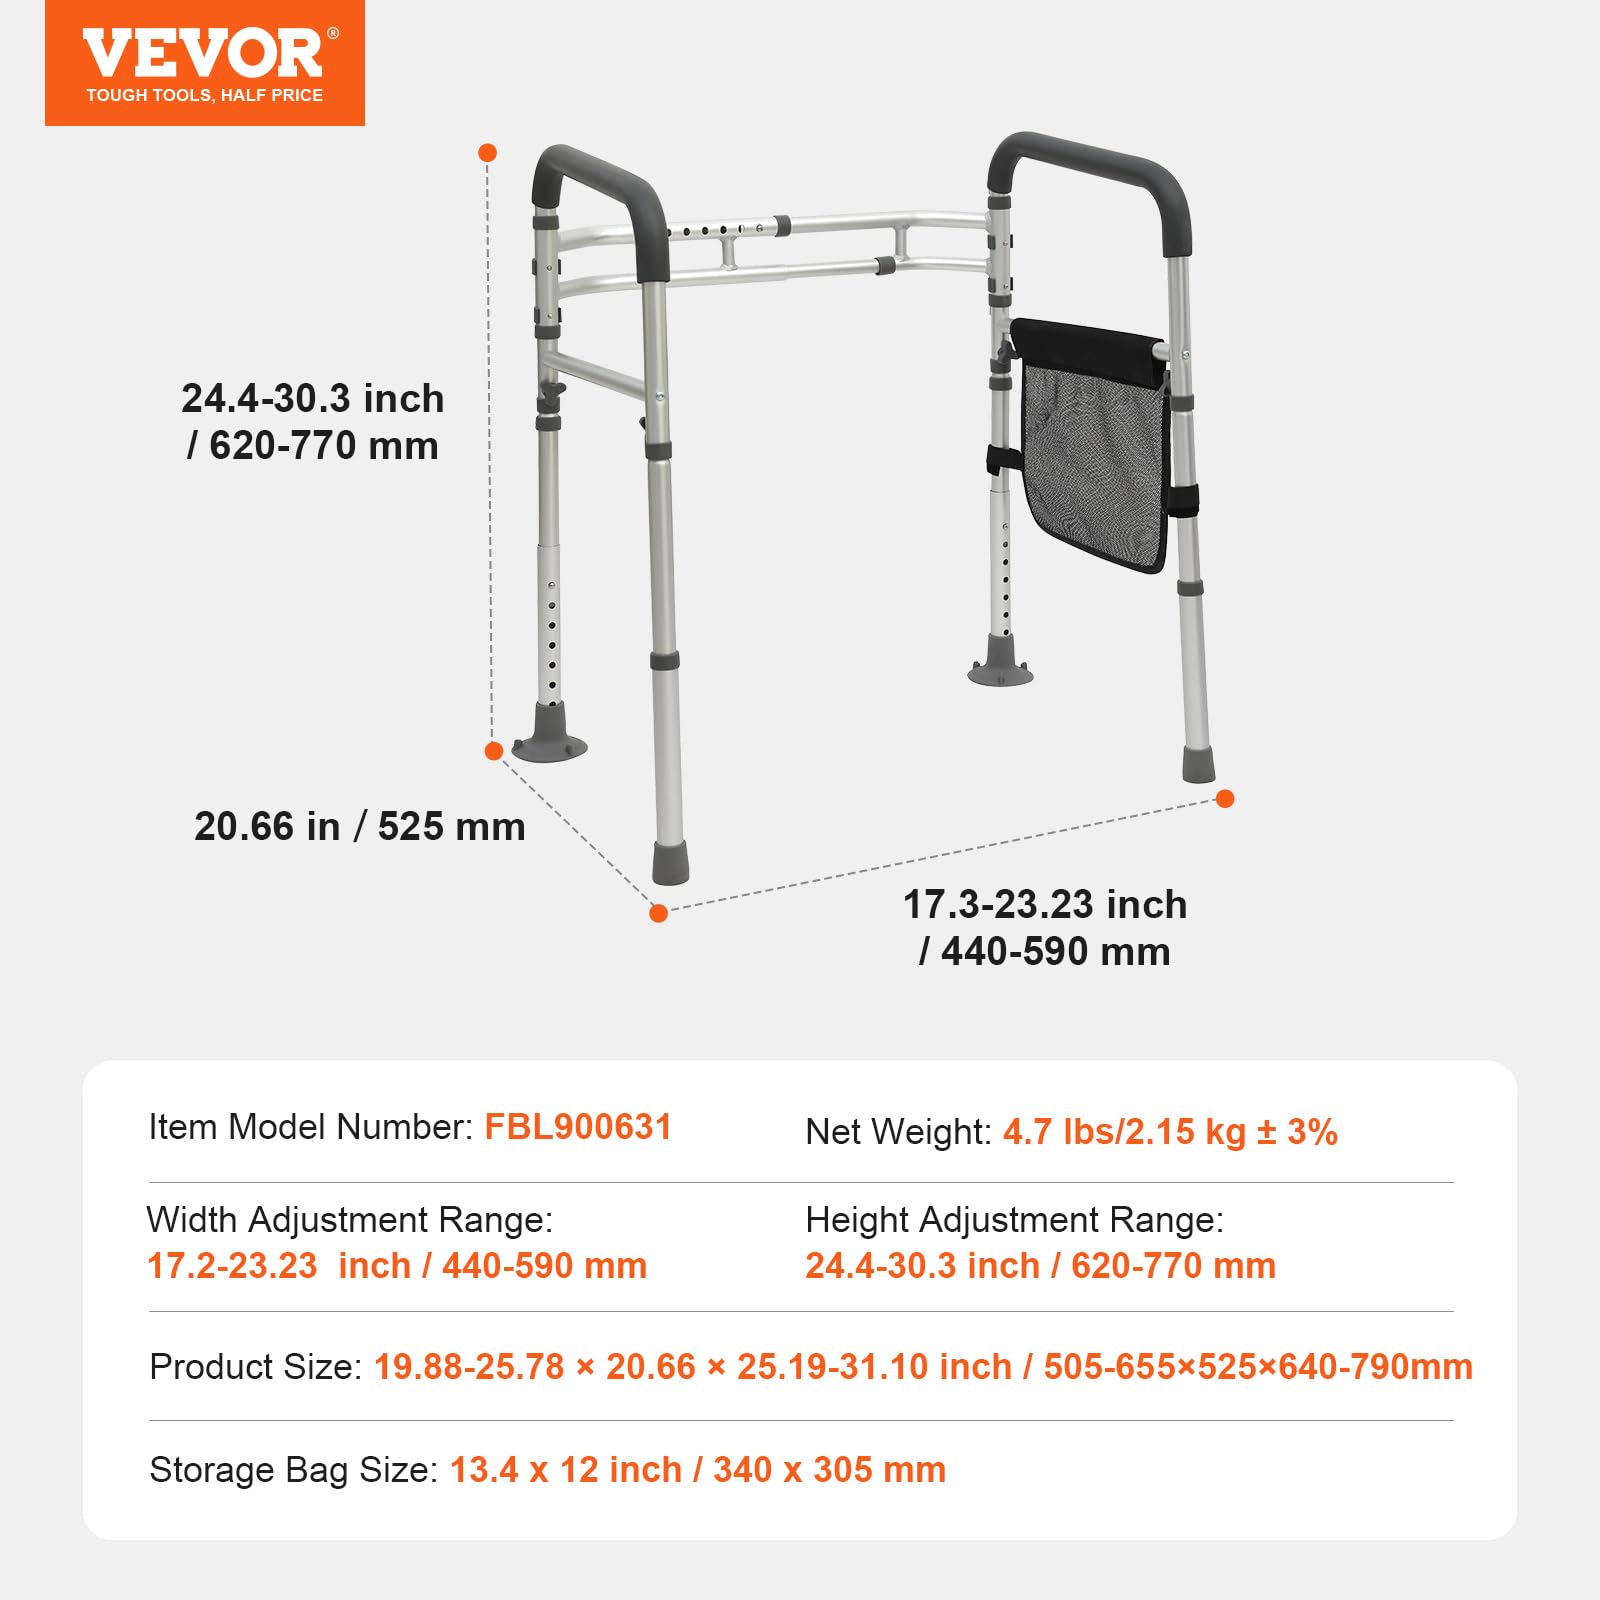 VEVOR Toilet Safety Rail, Folding Toilet Seat Frame, Adjustable Detachable Fit Most Toilets, Heavy 300lbs Capacity Duty Medical Bathroom Toilet Handrails Stand Alone for Handicap, Elderly, Disabled